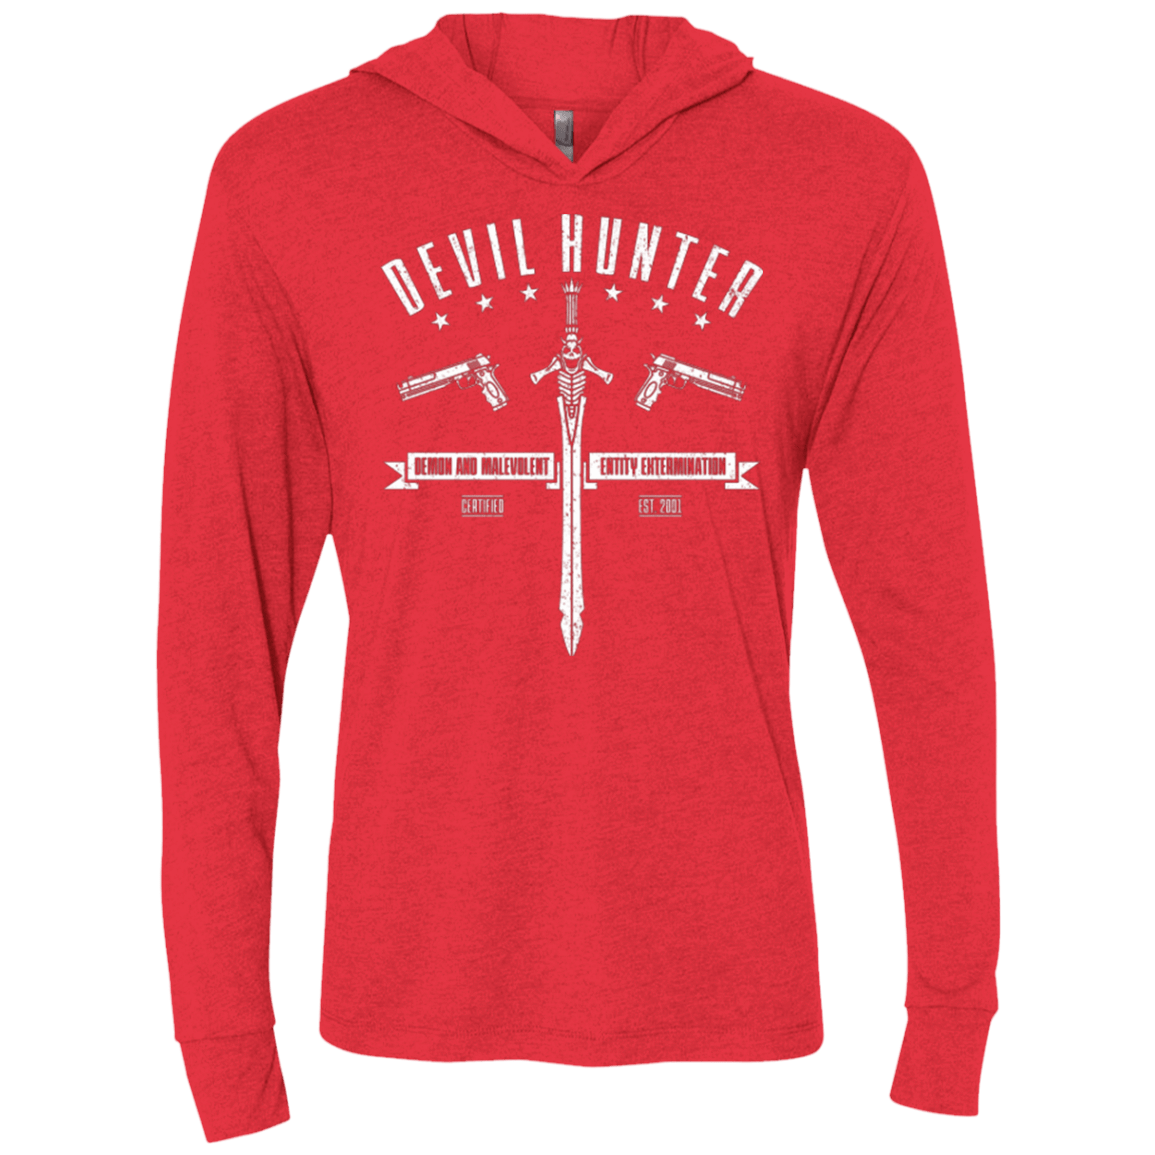 T-Shirts Vintage Red / X-Small Devil hunter Triblend Long Sleeve Hoodie Tee